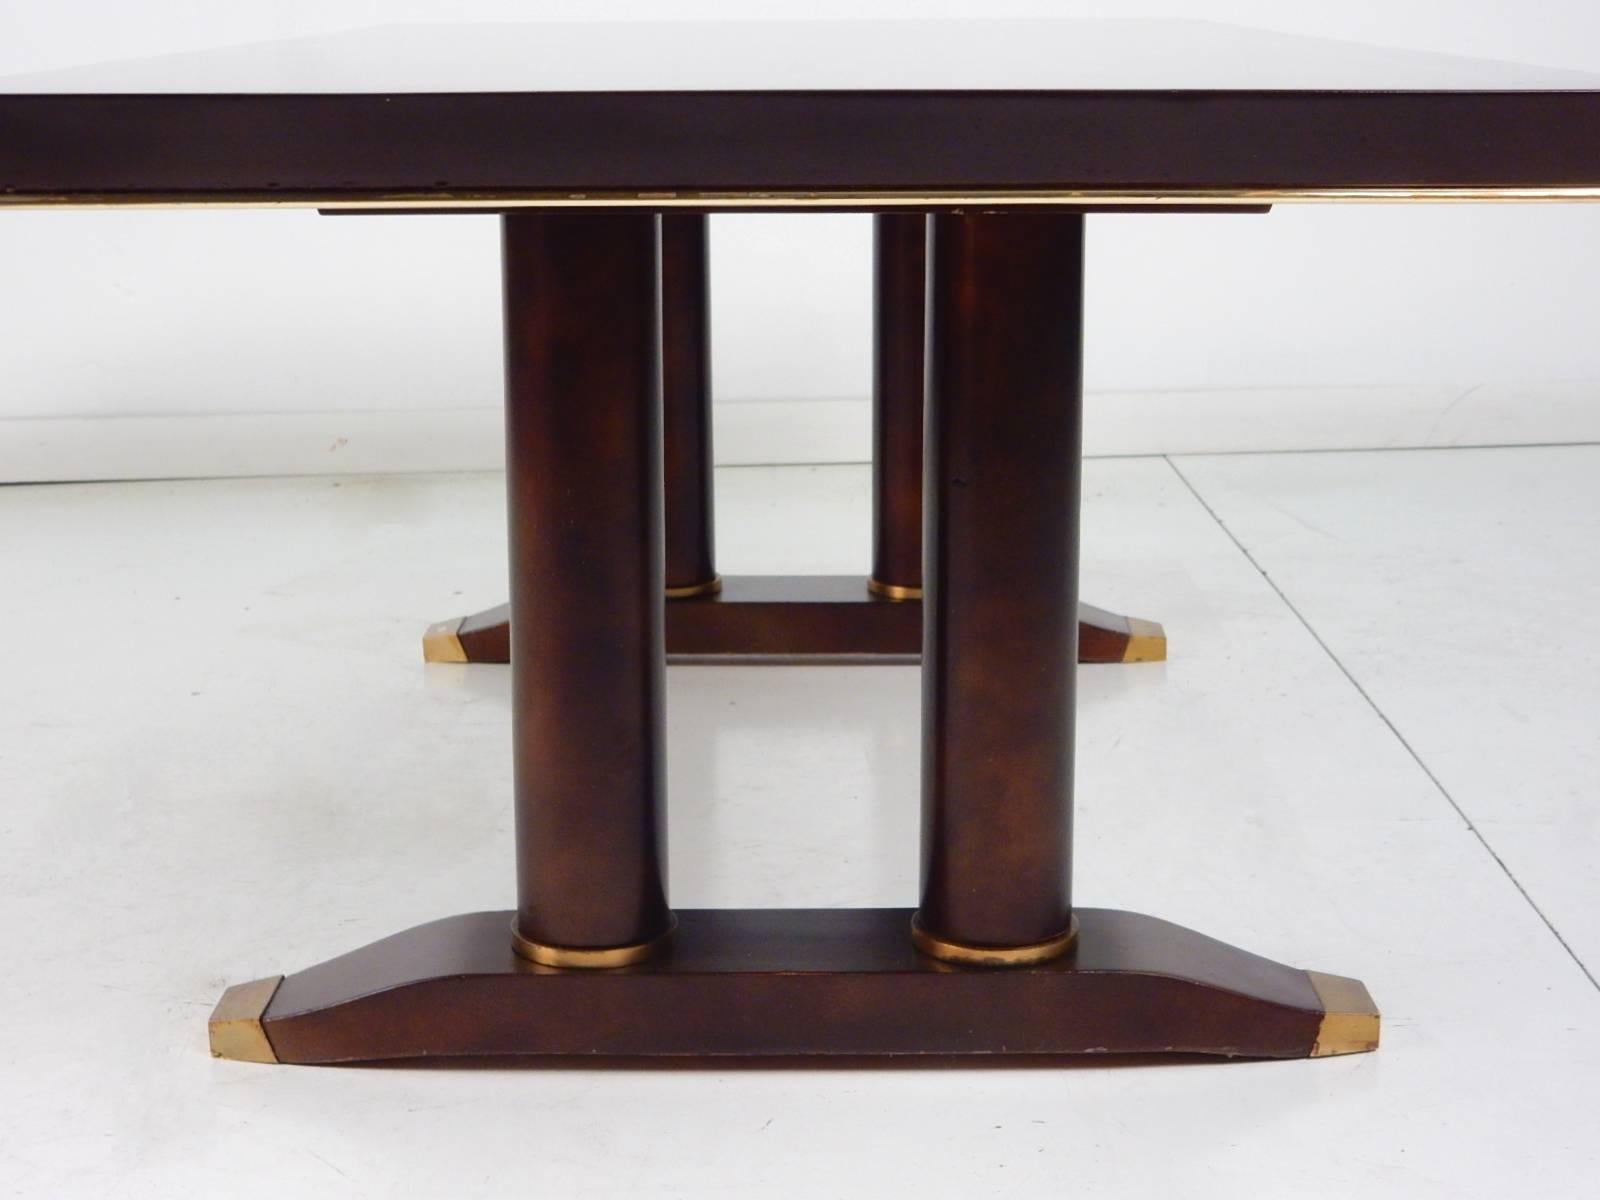 Mid-20th century mahogany coffee table by Batistin Spade (1891-1969) of Paris.
This is an exceptionally rare rectangular bronze trimmed coffee table. 
Bronze rings on base of leg columns and capped feet.
Marked B. Spade Decorateur Paris on